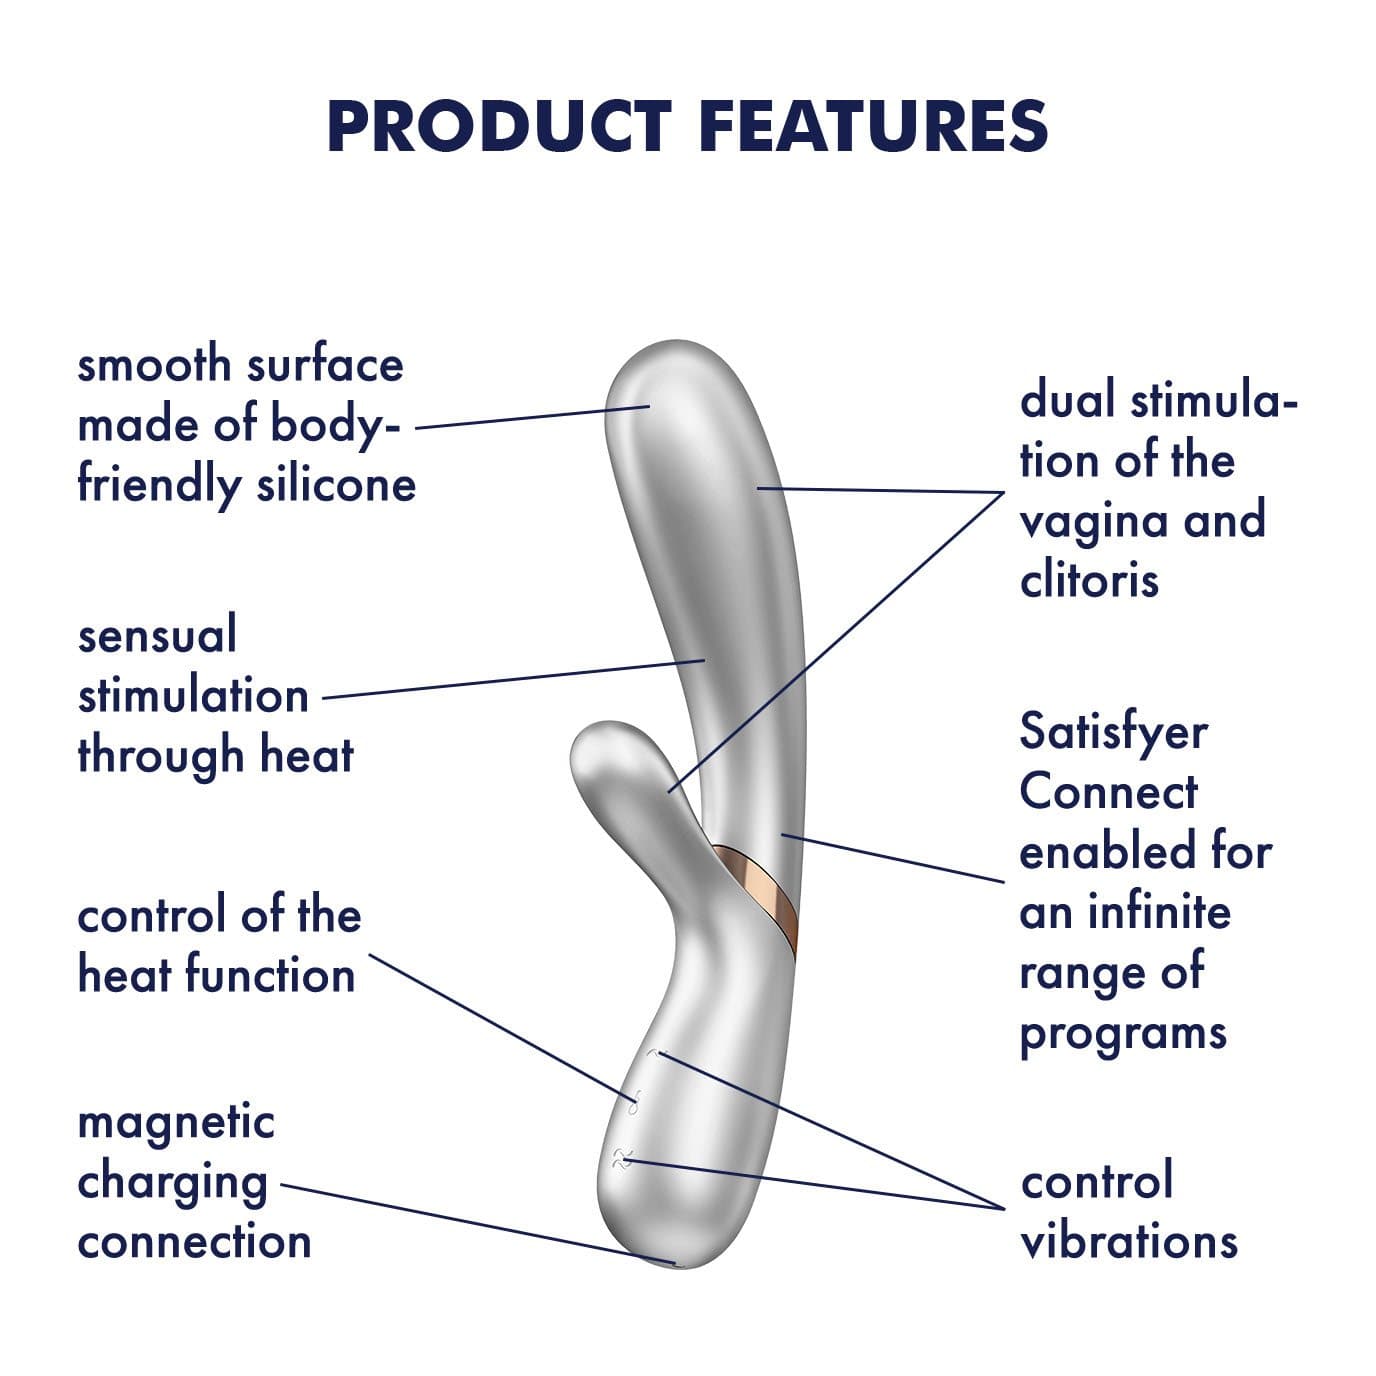 Satisfyer - Hot Lover Warming Rabbit Vibrator with Bluetooth and App (Silver/Champagne) Rabbit Dildo (Vibration) Rechargeable 520203906 CherryAffairs